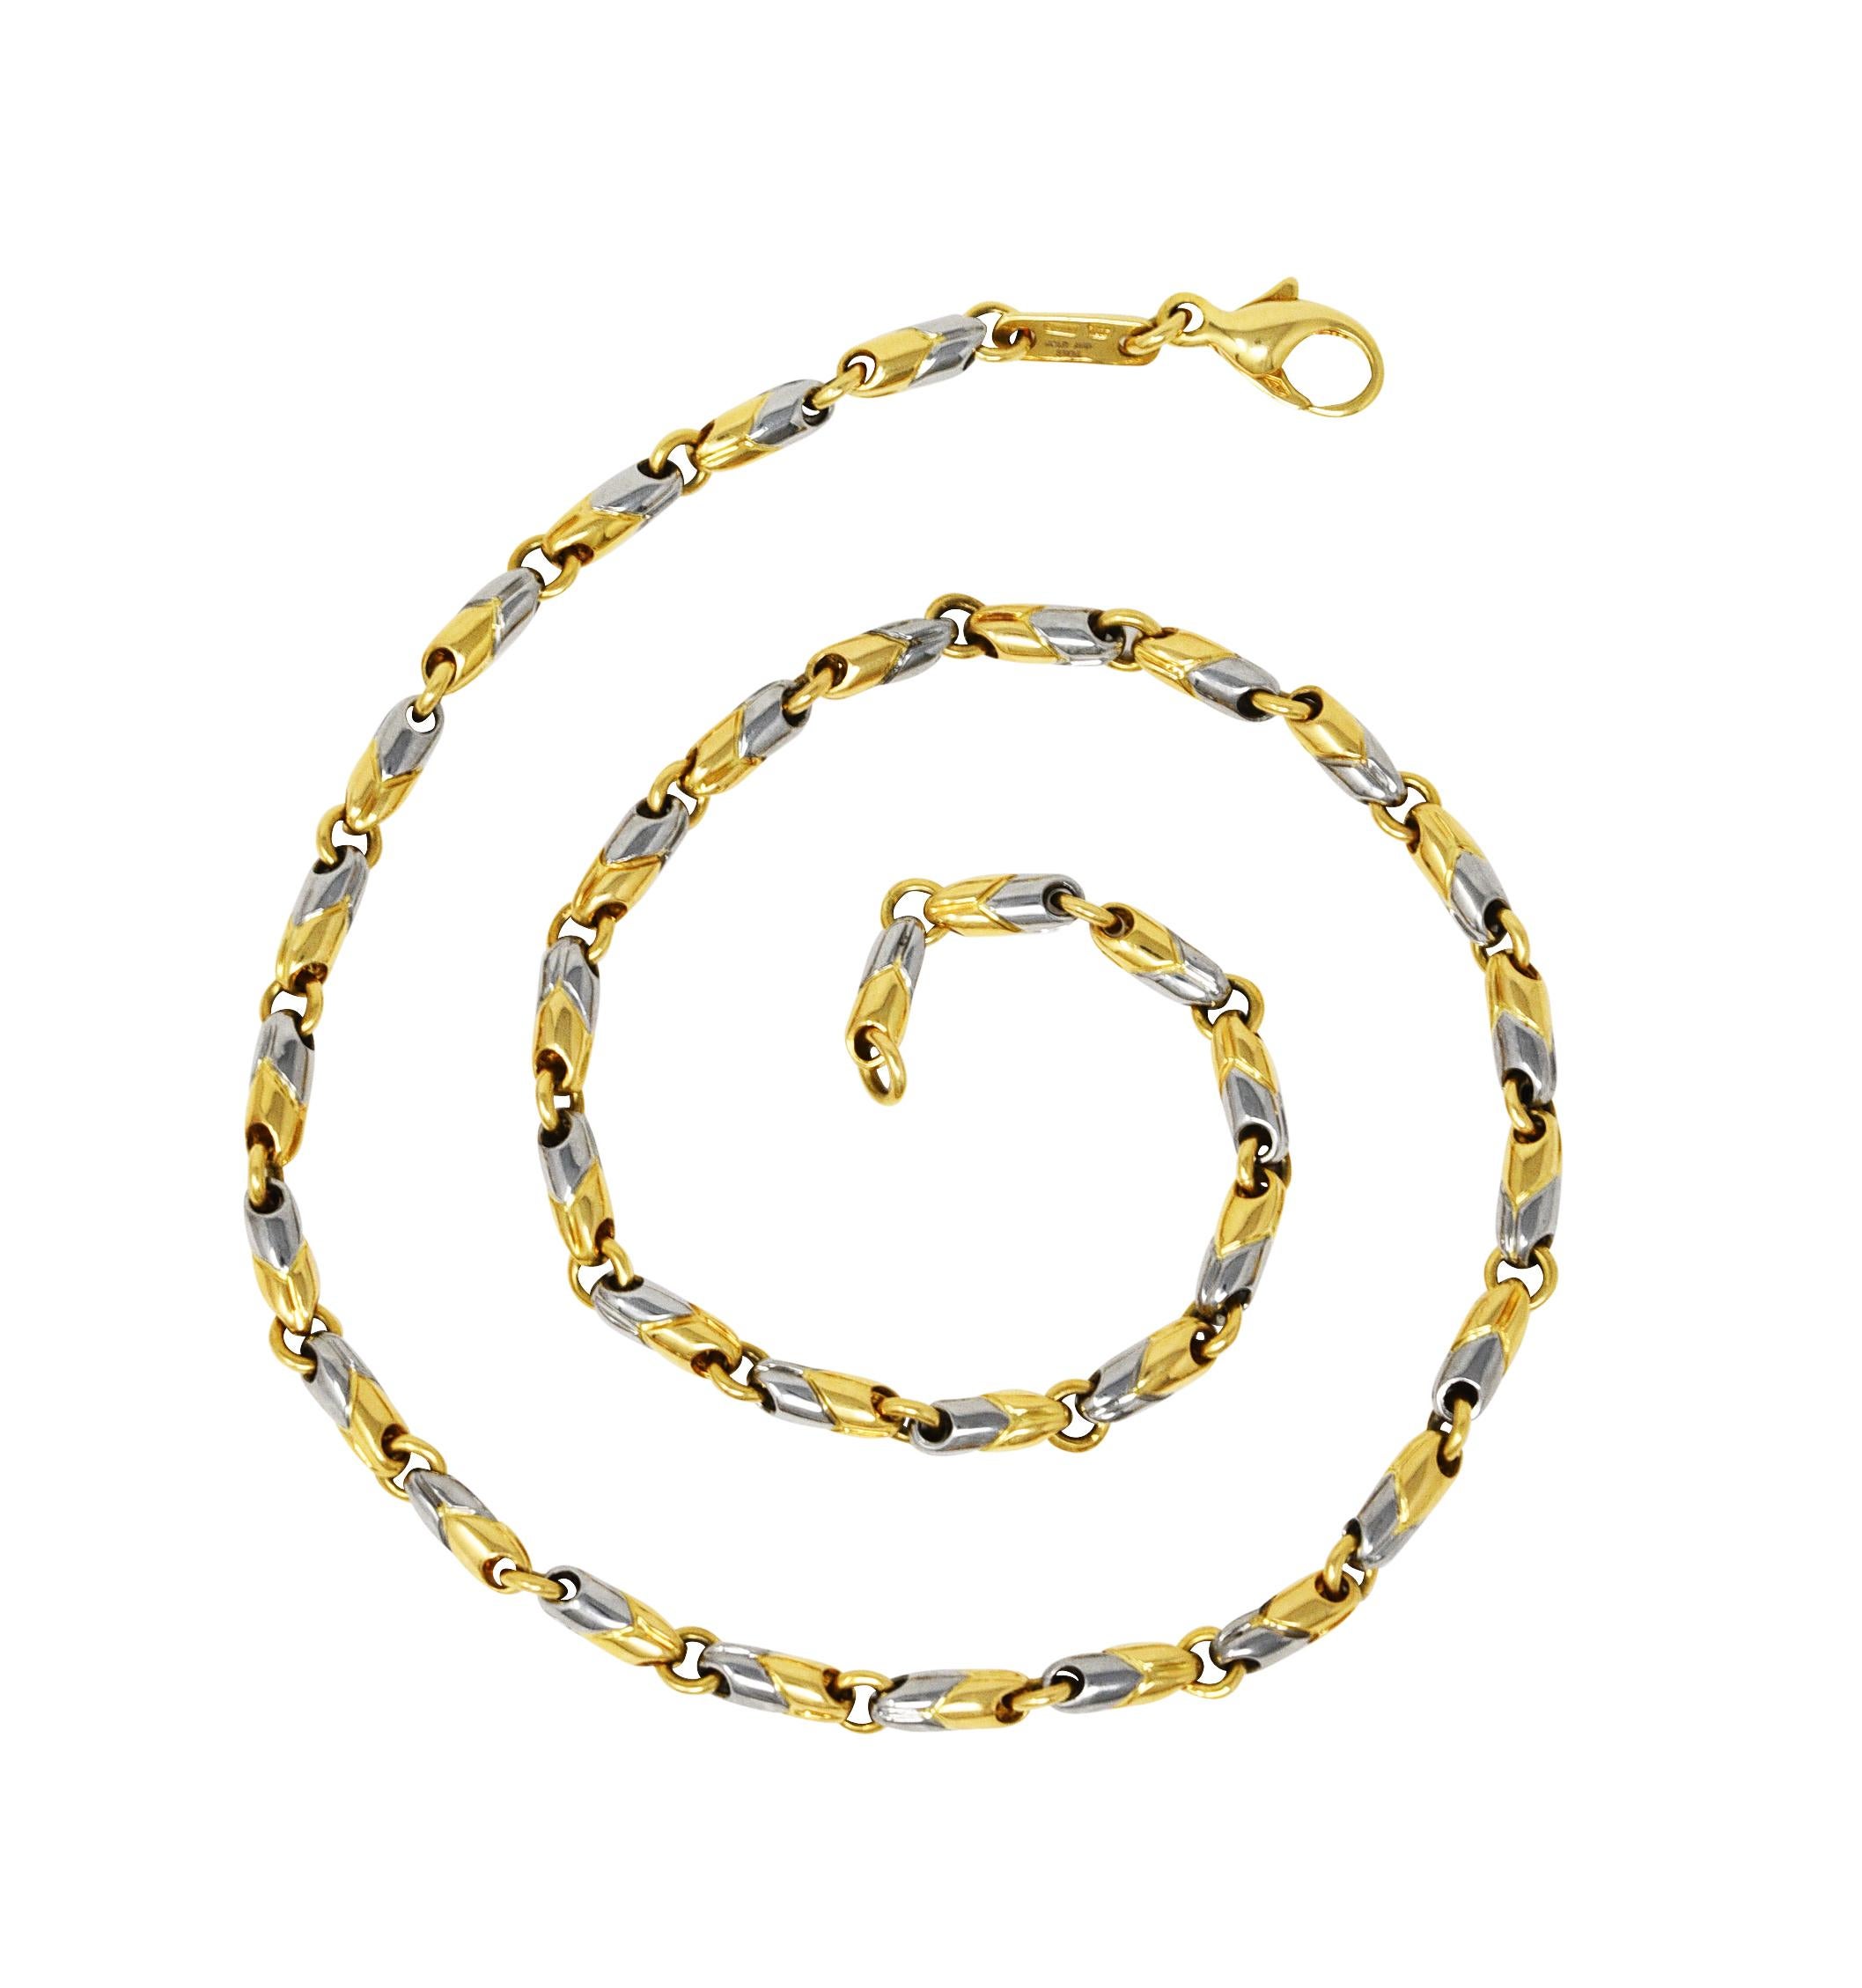 Necklace is comprised of grooved barrel links with signature Passo Doppio chevron motif. Links are one half white gold and one half yellow gold. With jump ring spacer links. Completed by lobster clasp closure. Stamped 750 with Italian assay marks